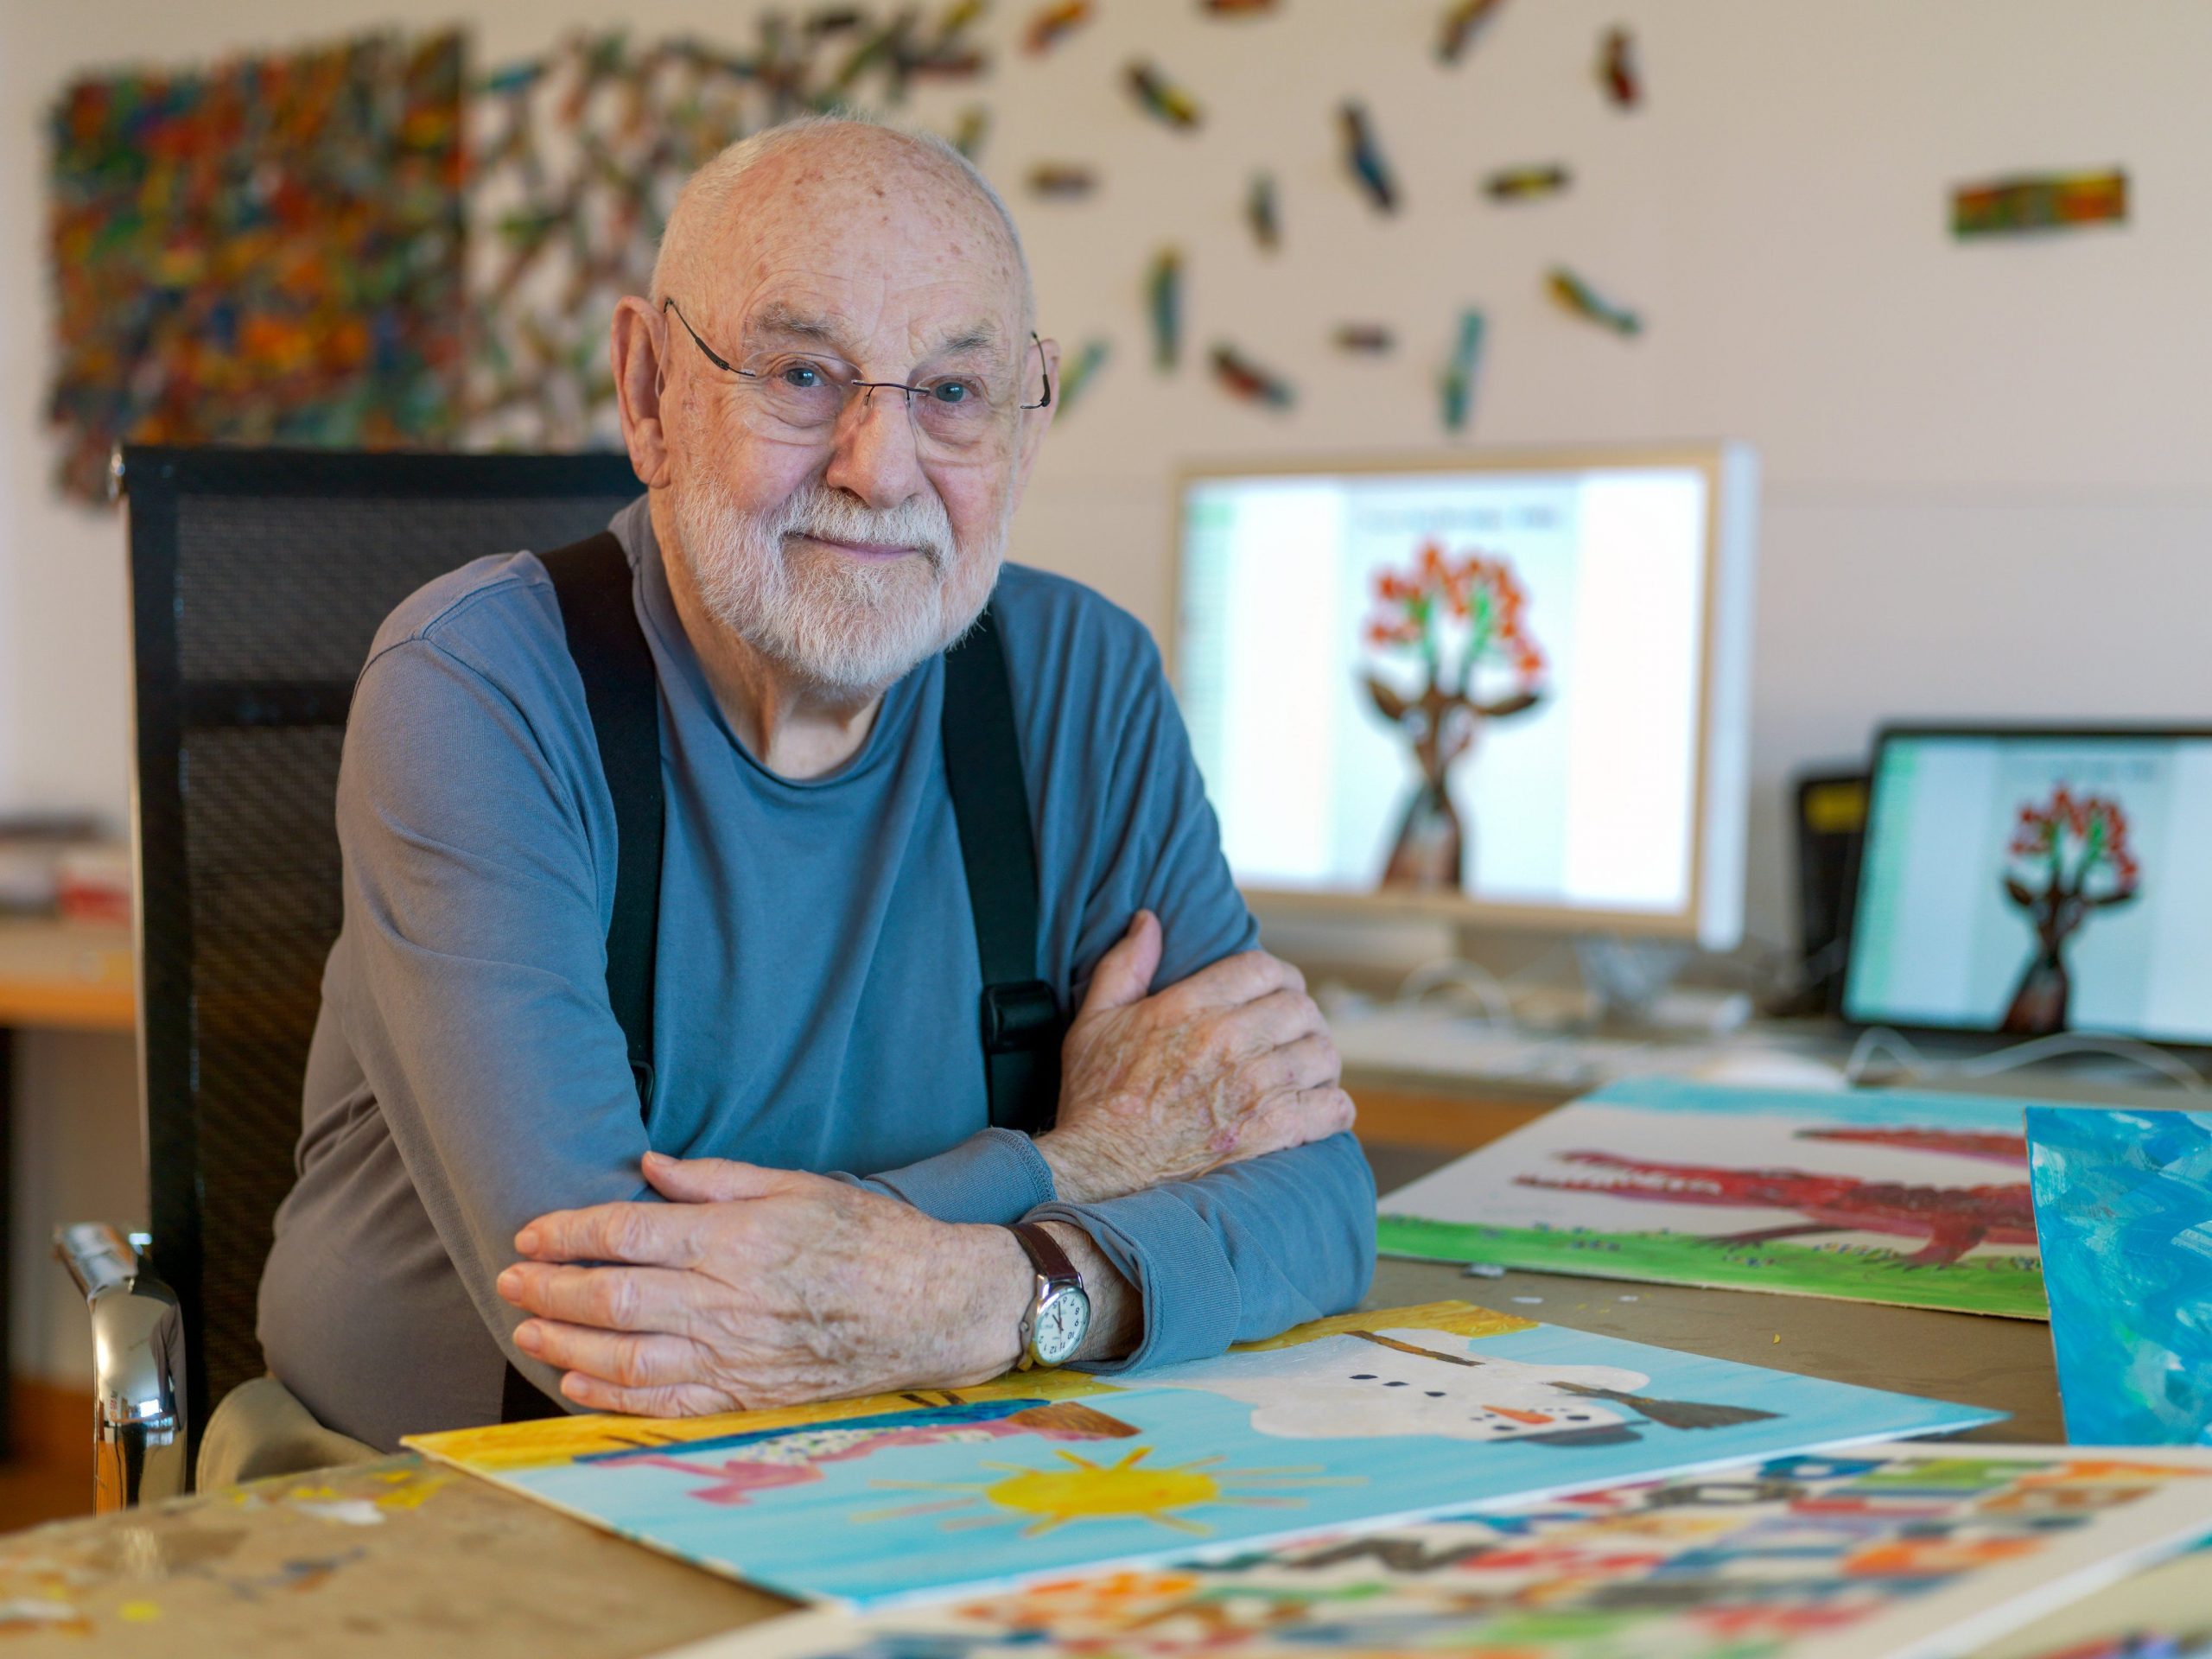 ‘The Very Hungry Caterpillar’ author Eric Carle dies at 91